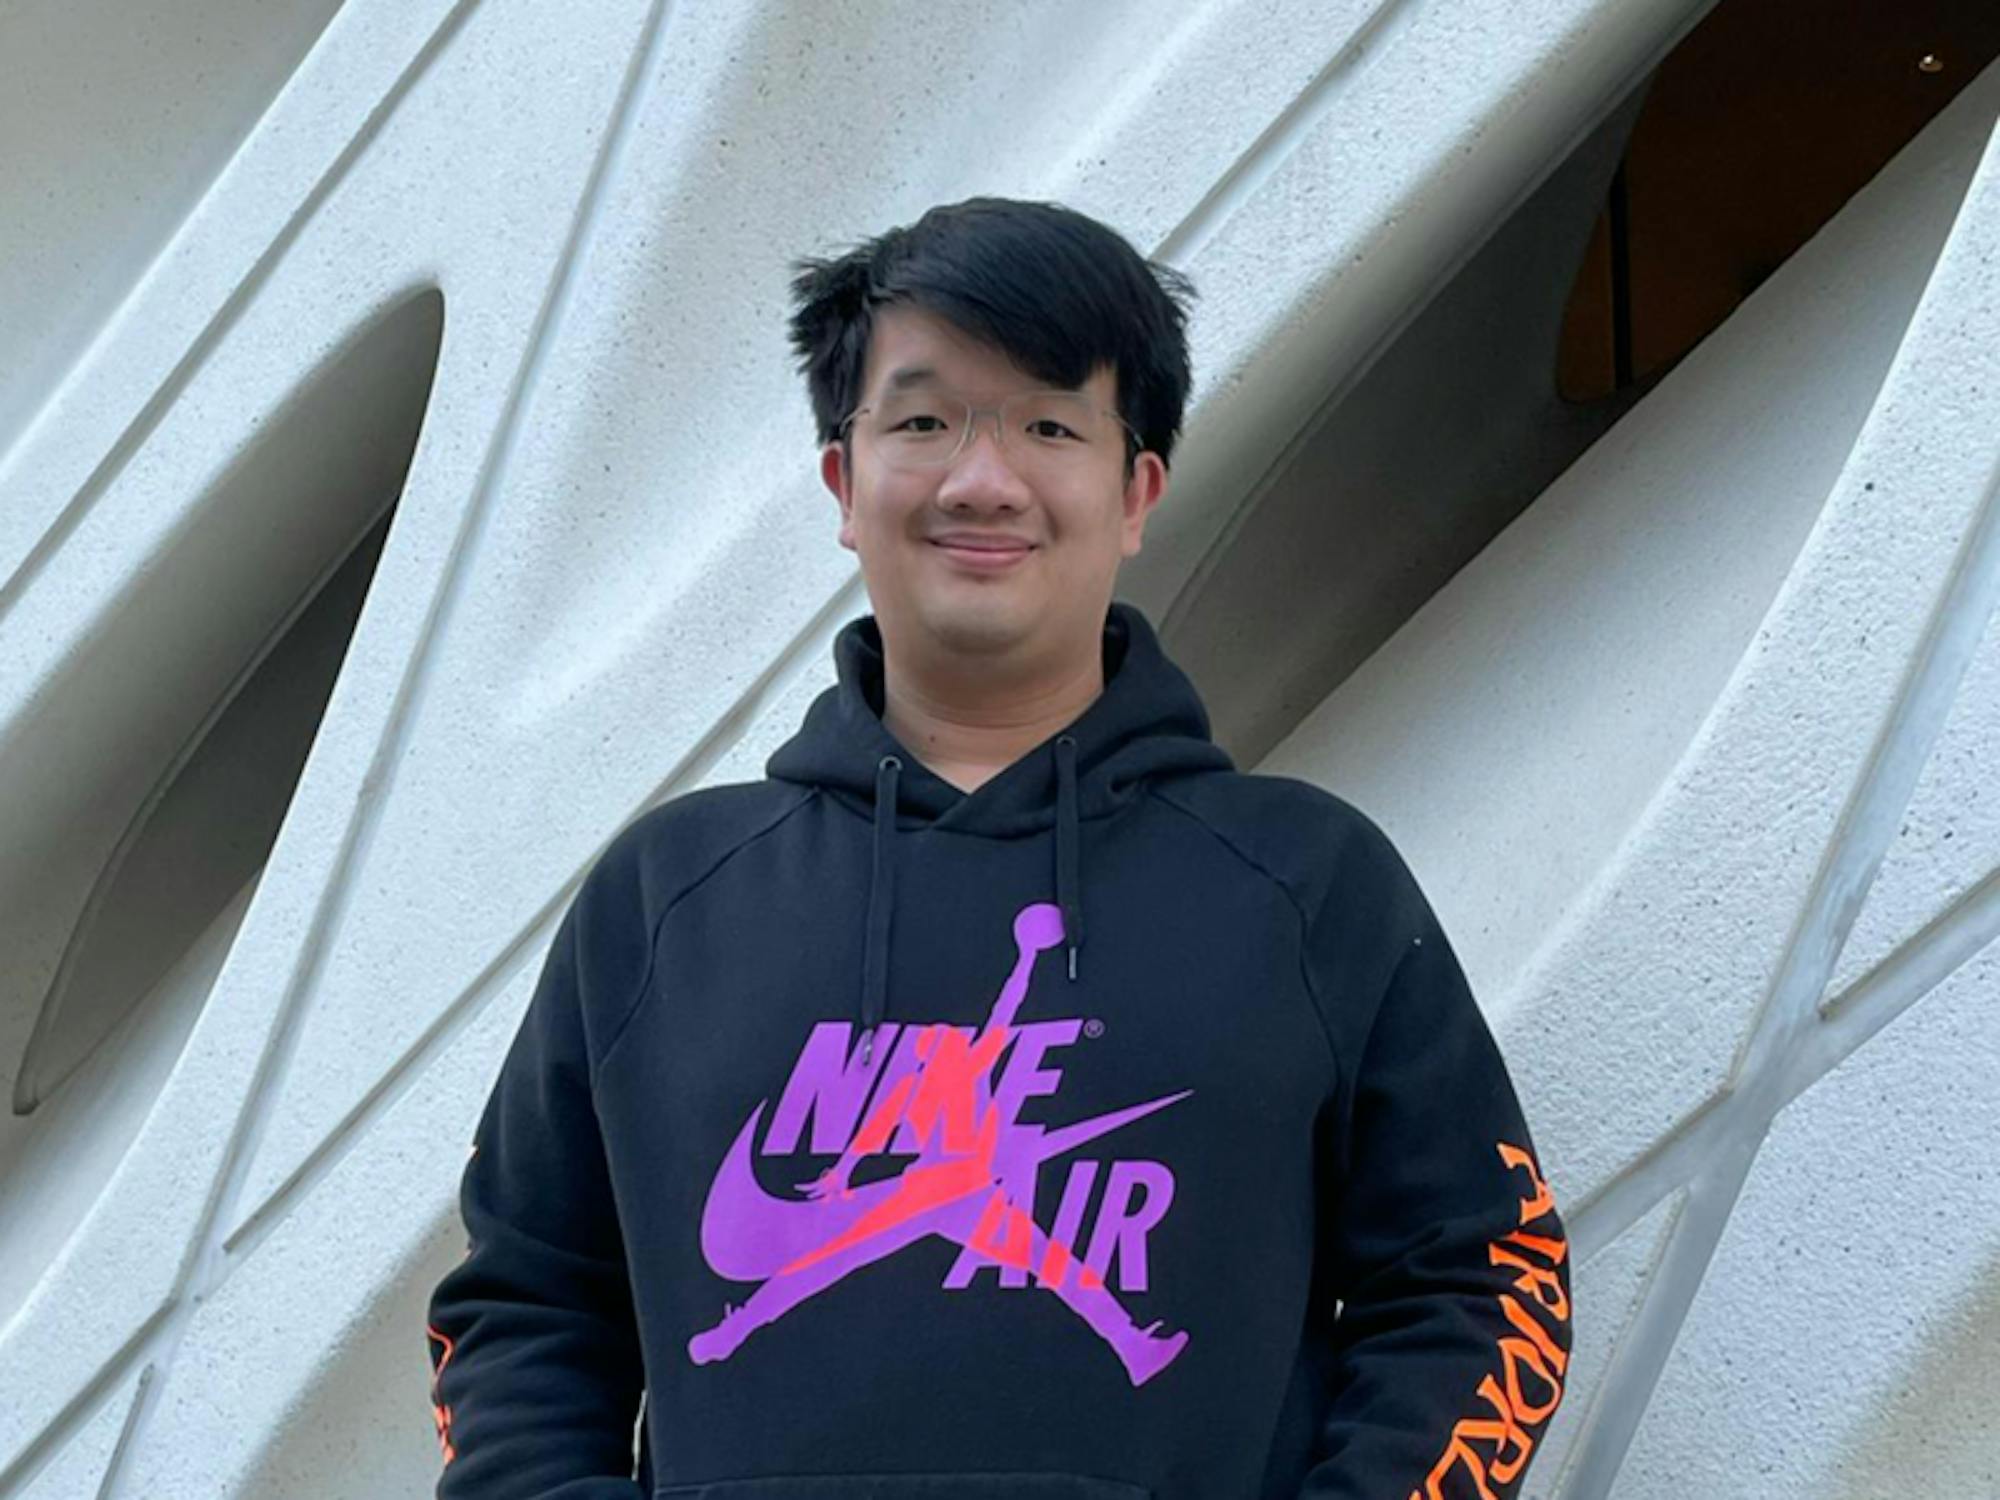 A young man in a hoodie smiles outside an artistically-sculpted building